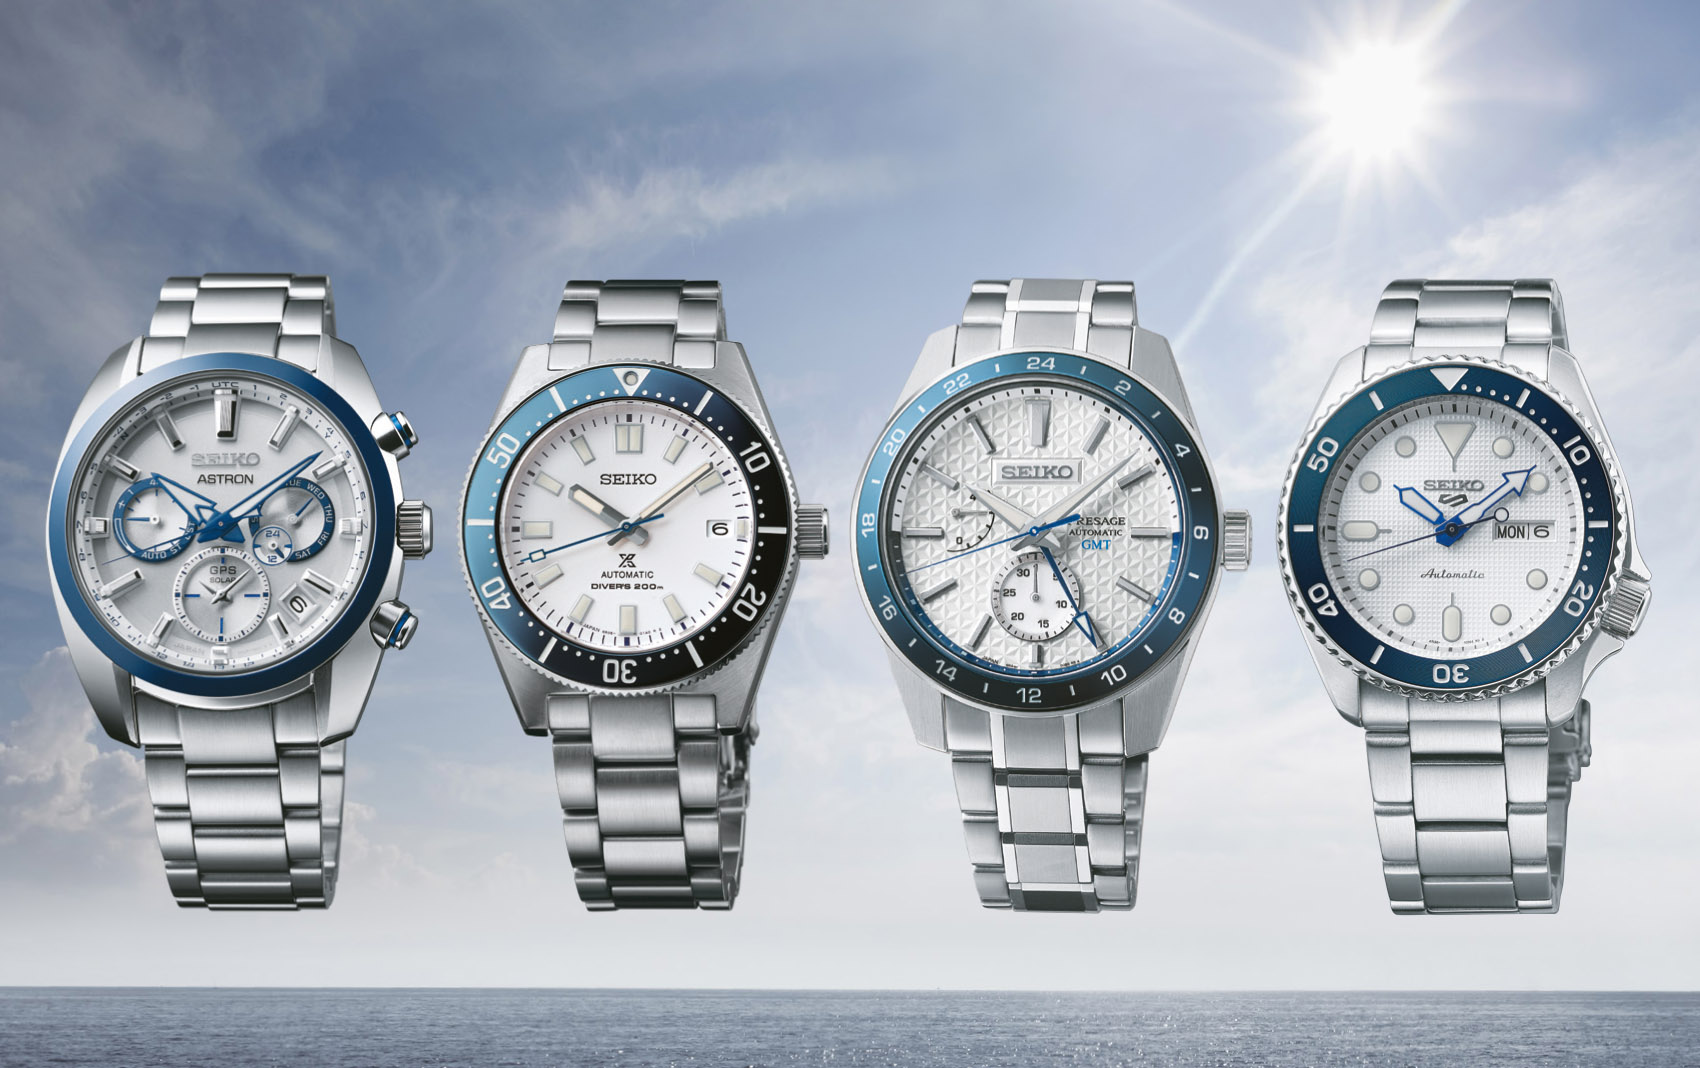 Seiko starts anniversary year with stable of flinty white and steel sports watches